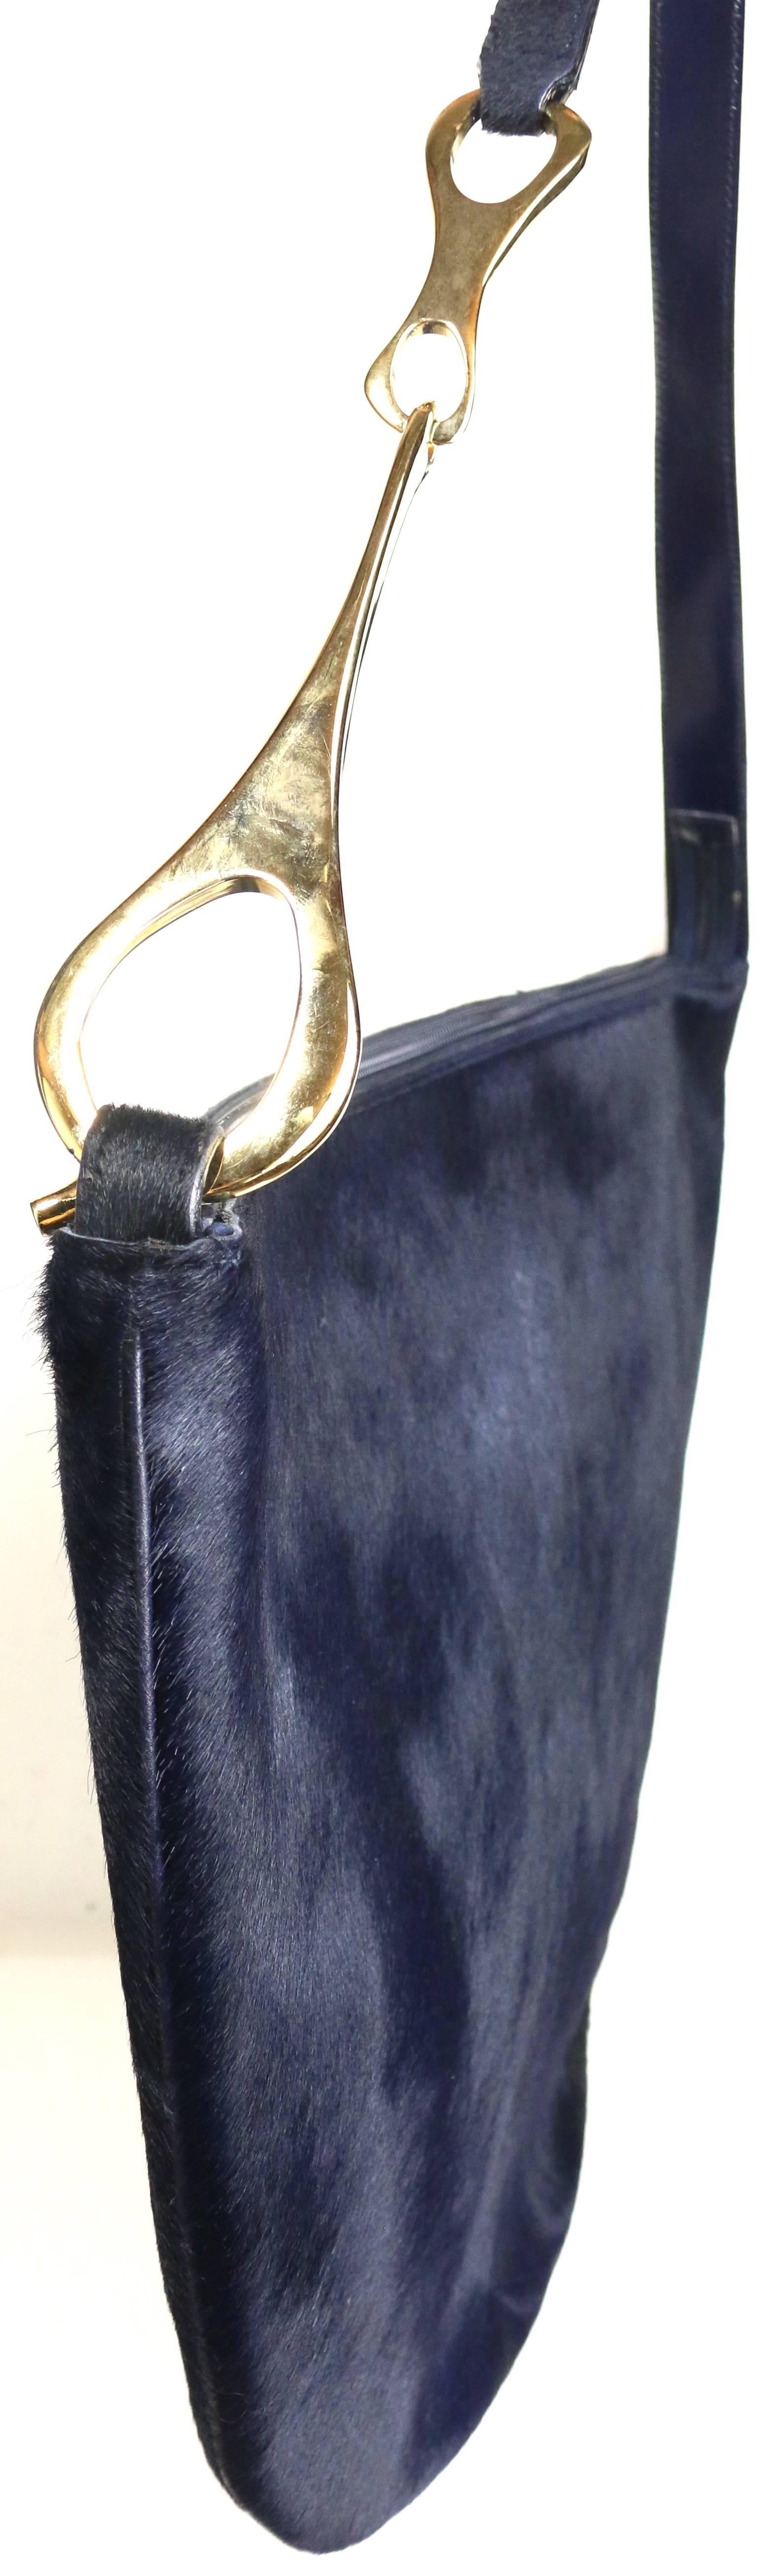 - Gucci by Tom Ford navy pony hair jumbo shoulder bag from Fall 1996 collection. 

- Half circle shape. 

- The signature Fall 1996 collection gold toned metal buckle shoulder strap.

- Gold toned metal 